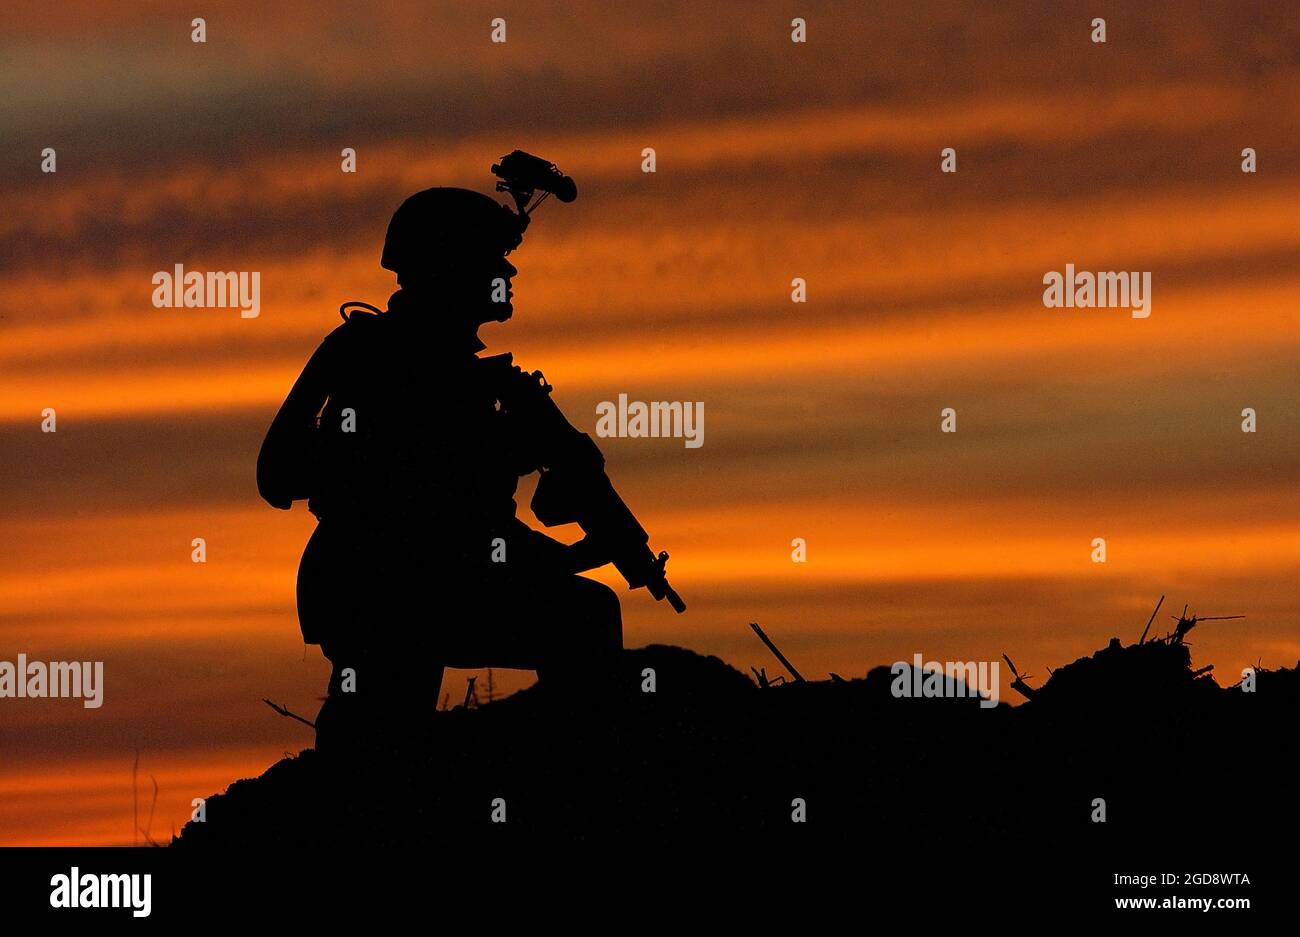 At dusk, a US Army (USA) soldier from the 1st Infantry Division, Logistics Support Area (LSA) Anaconda, Iraq, scans the area while conducting a patrol in support of Operation IRAQI FREEDOM.  (USAF PHOTO BY SSGT AARON D. ALLMON II 040426-F-7823A-003) Stock Photo